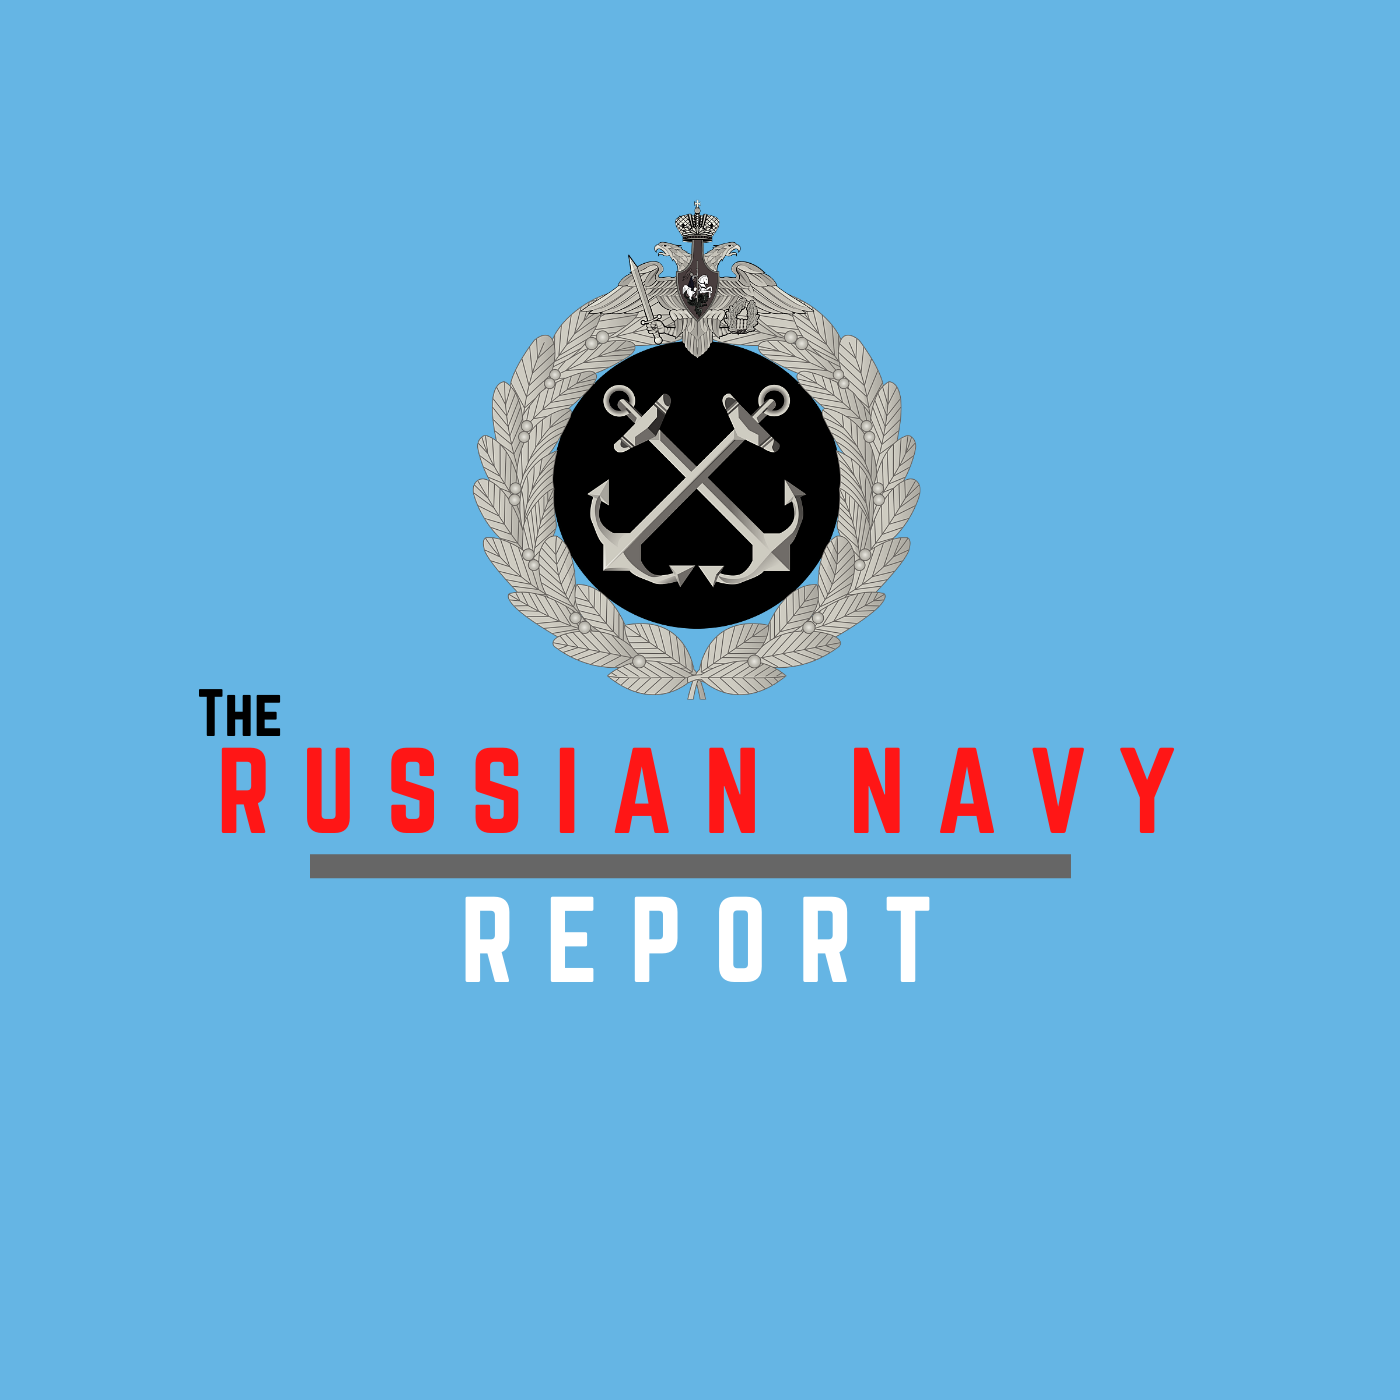 The Russian Navy Report